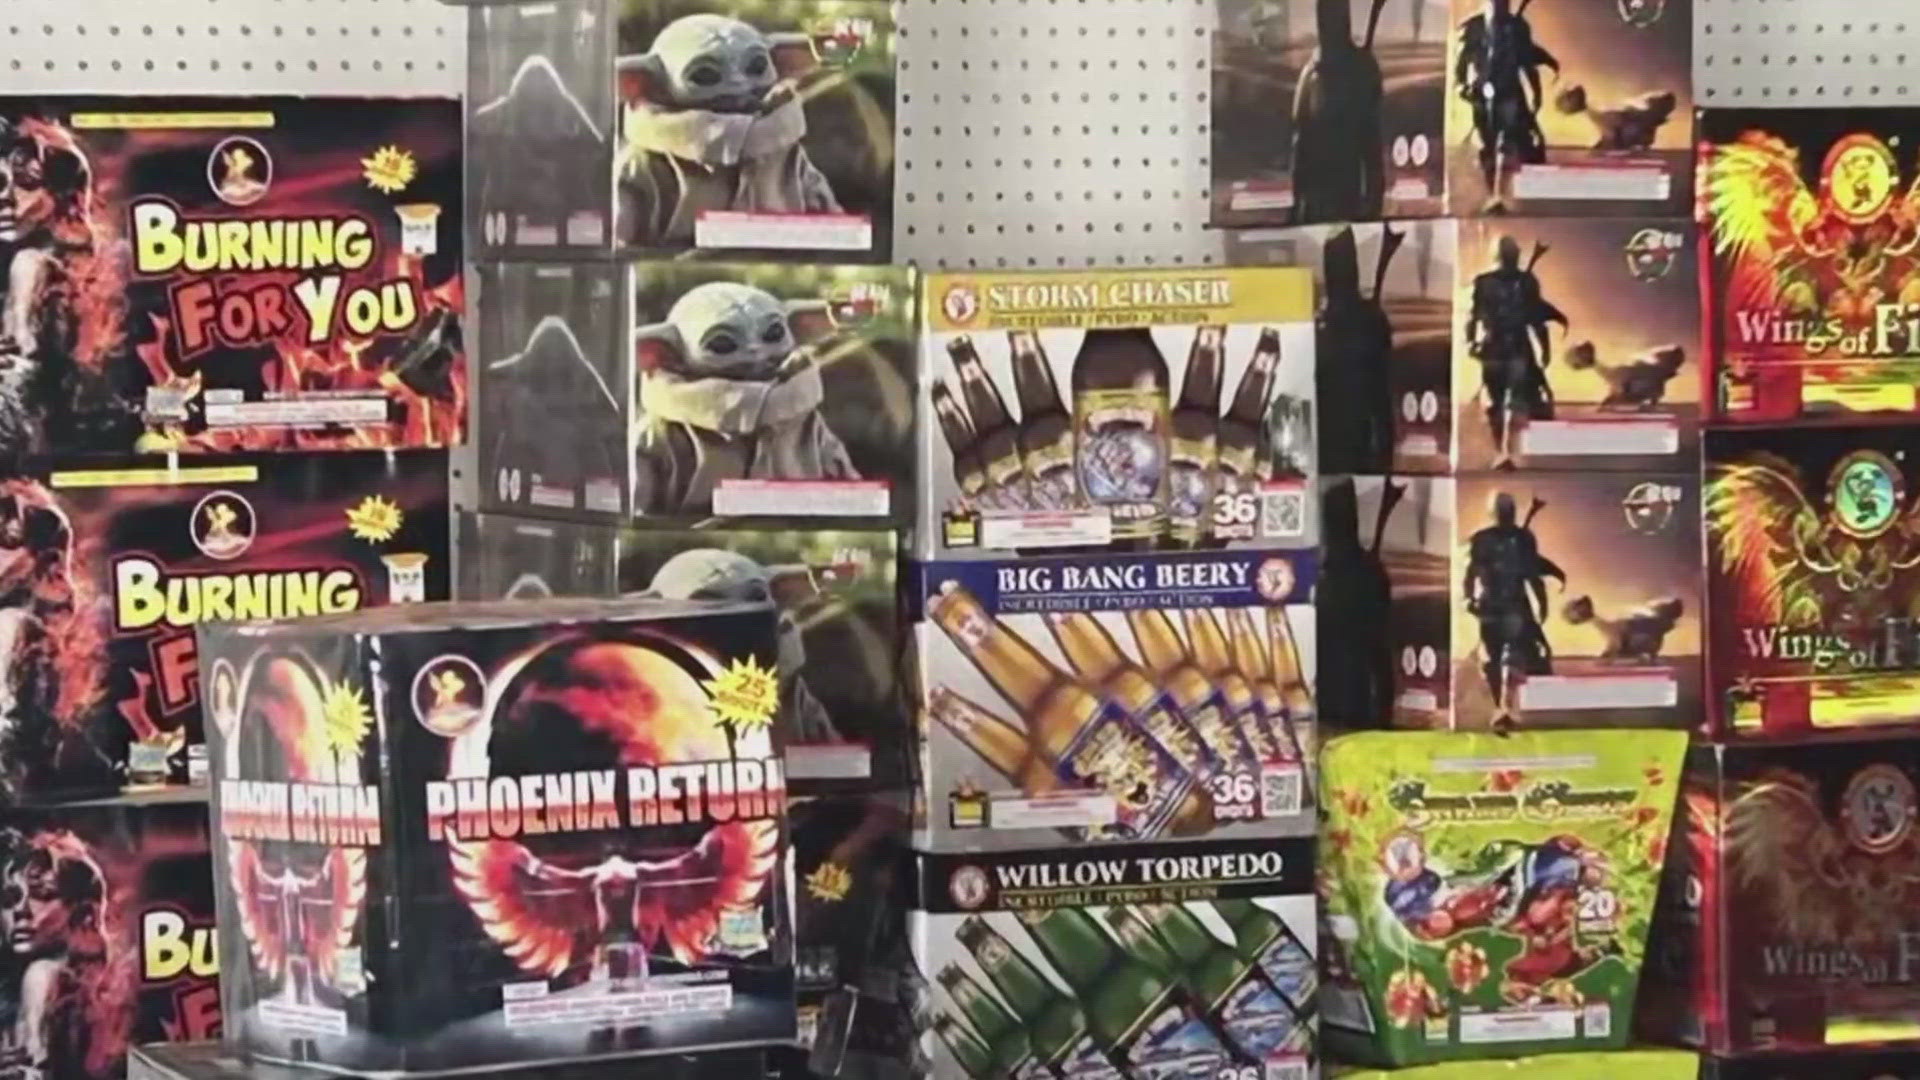 Illegal fireworks bust in Sacramento County